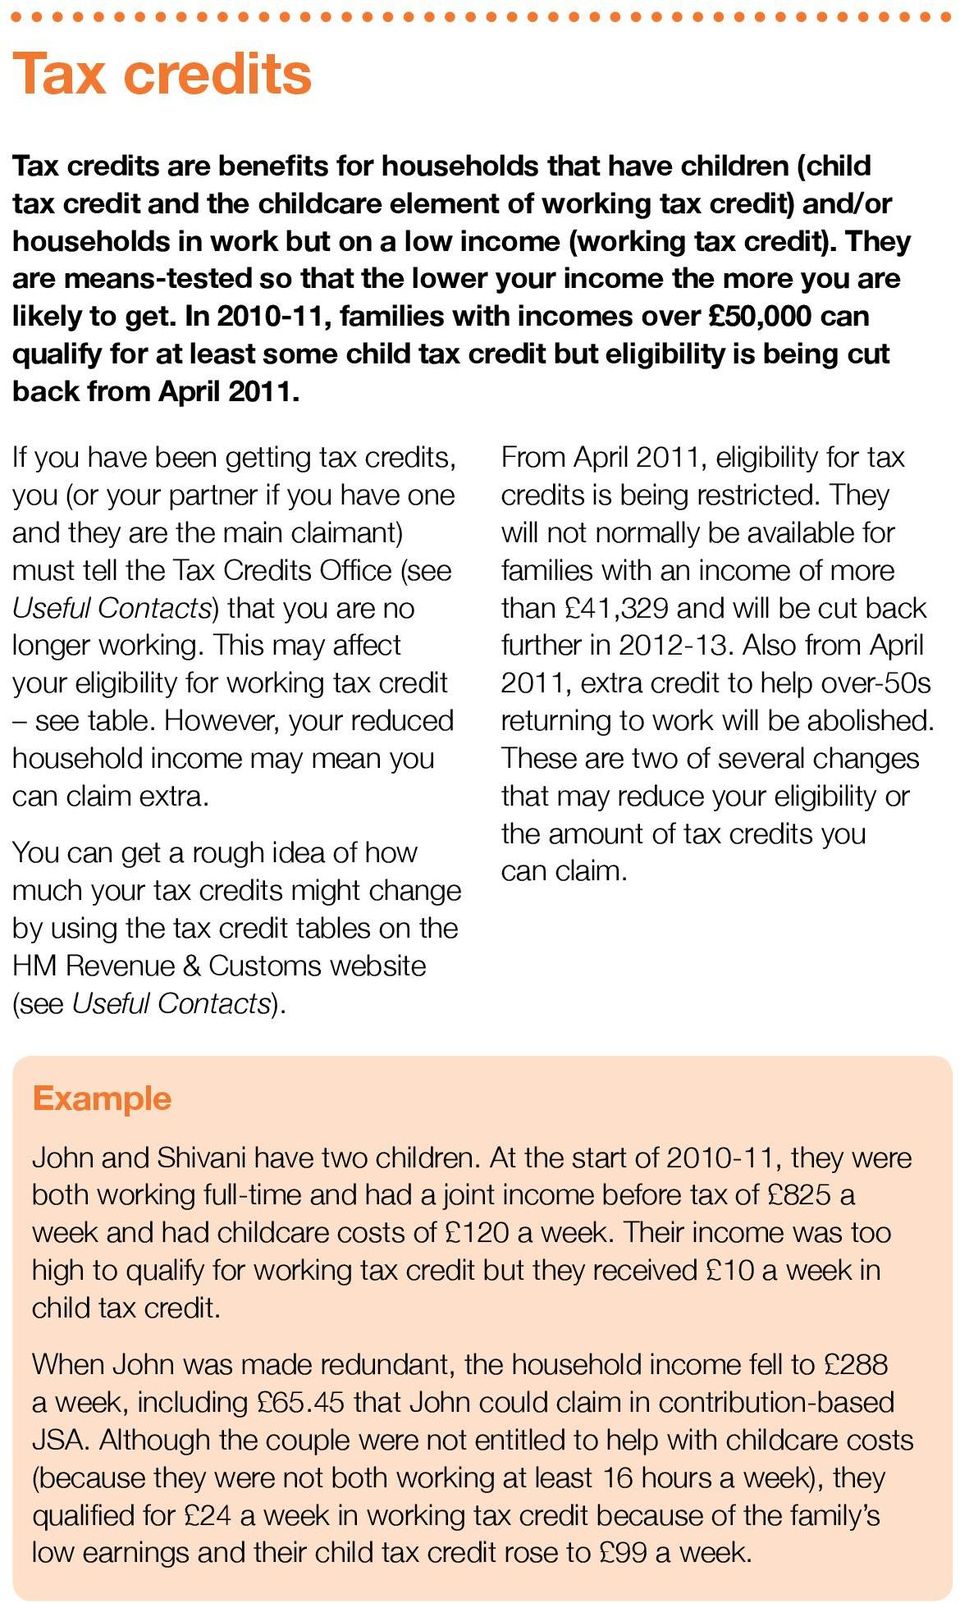 In 2010-11, families with incomes over 50,000 can qualify for at least some child tax credit but eligibility is being cut back from April 2011.